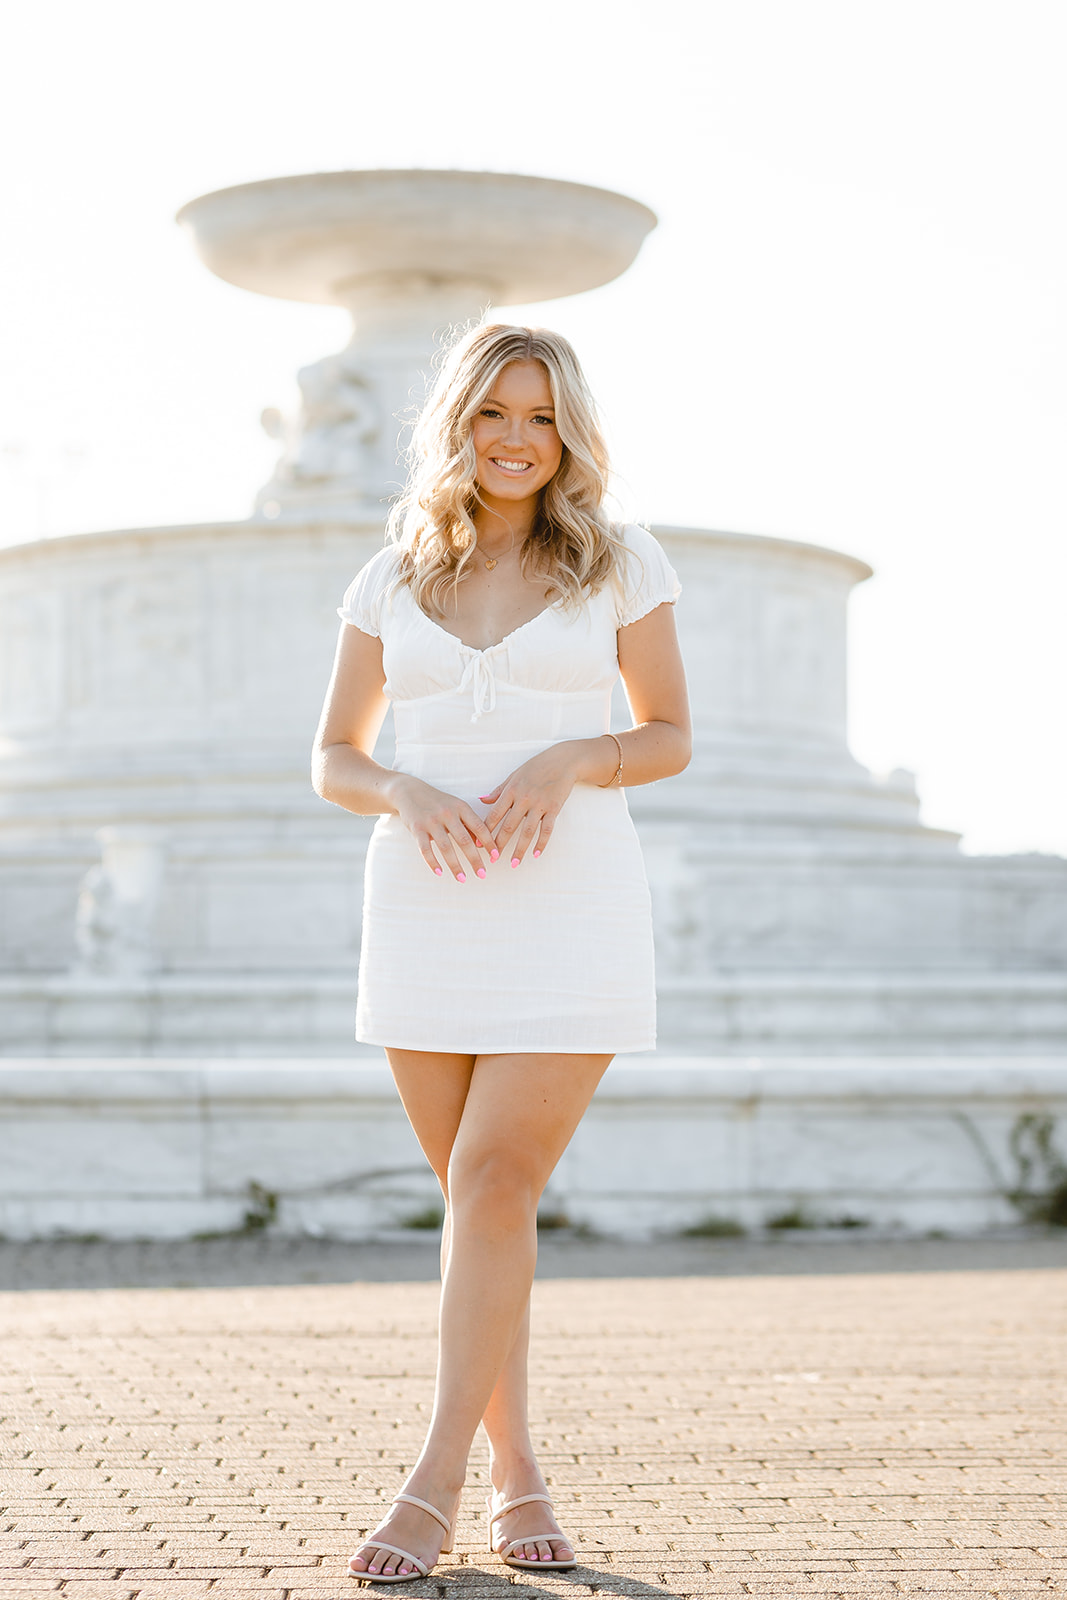 Olivia at the Belle Isle fountain during her senior portrait session